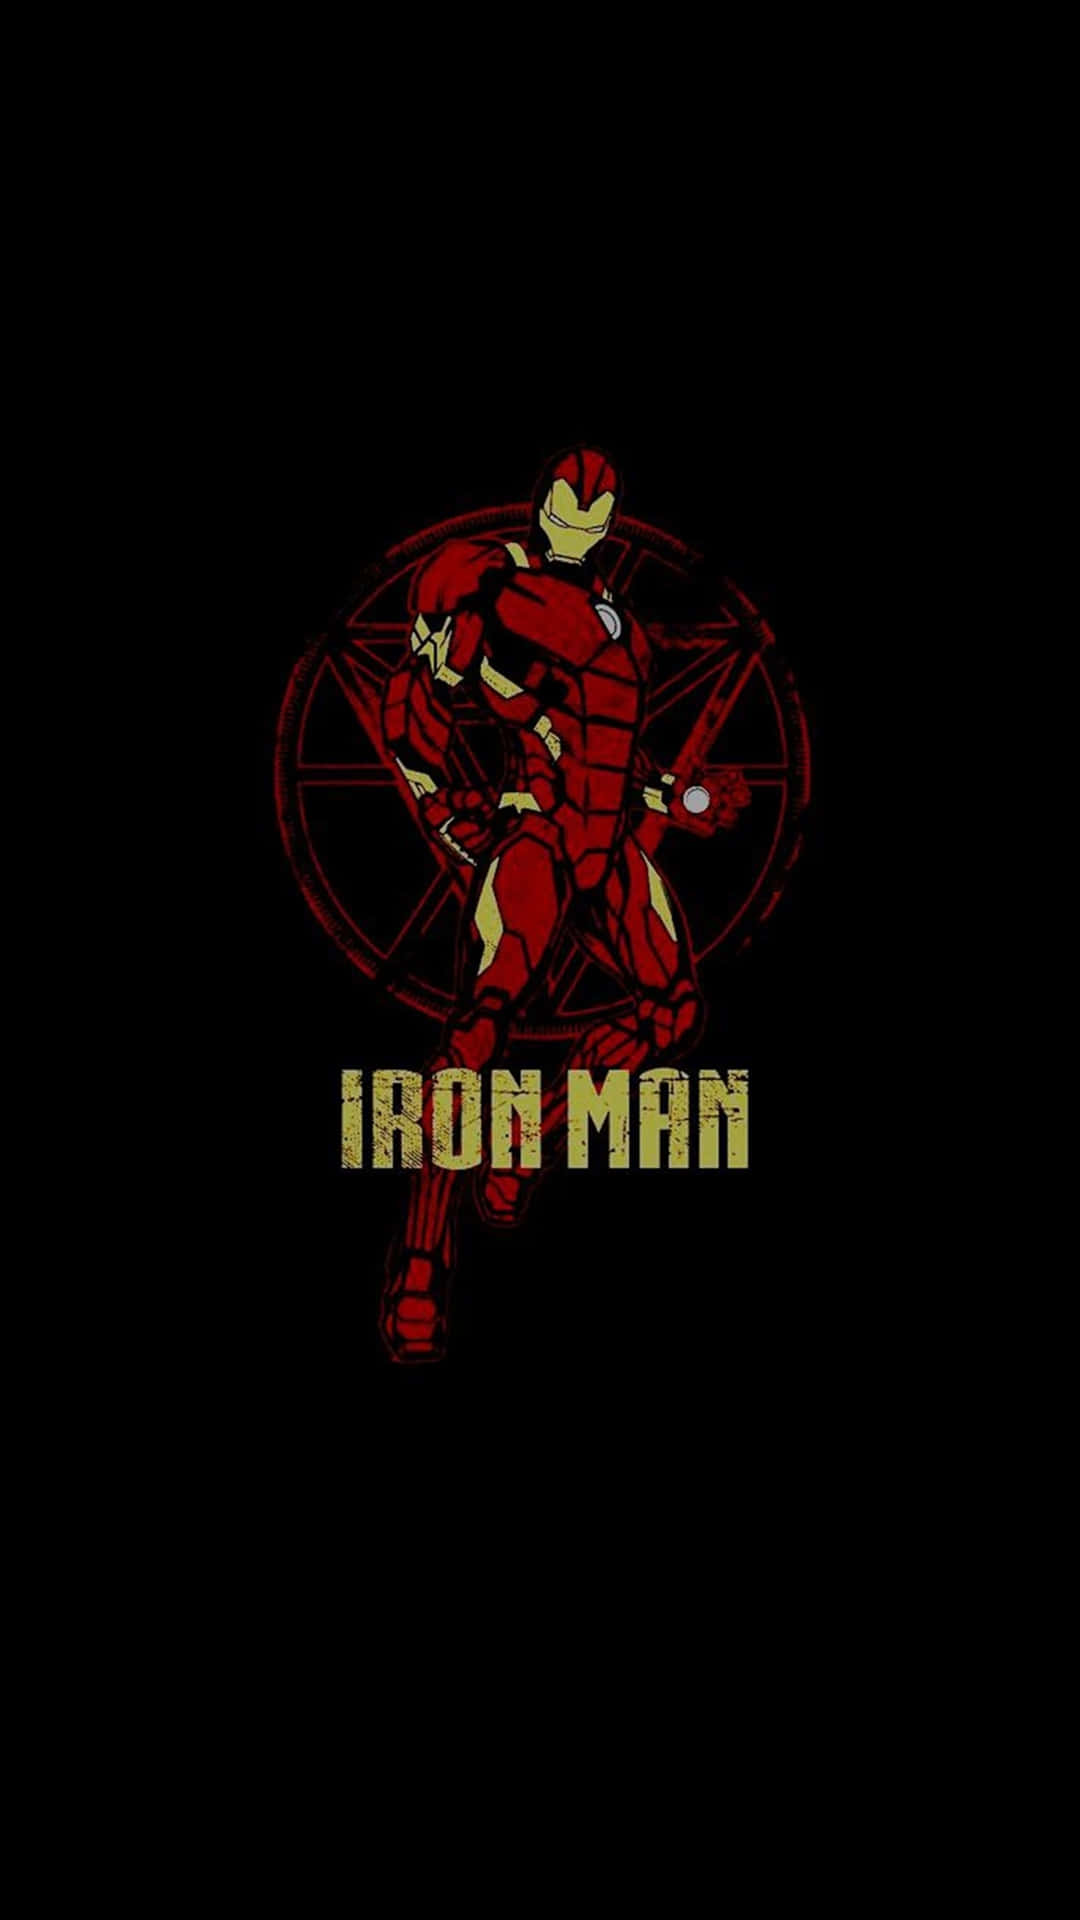 Iron Man in high definition on a mobile device Wallpaper